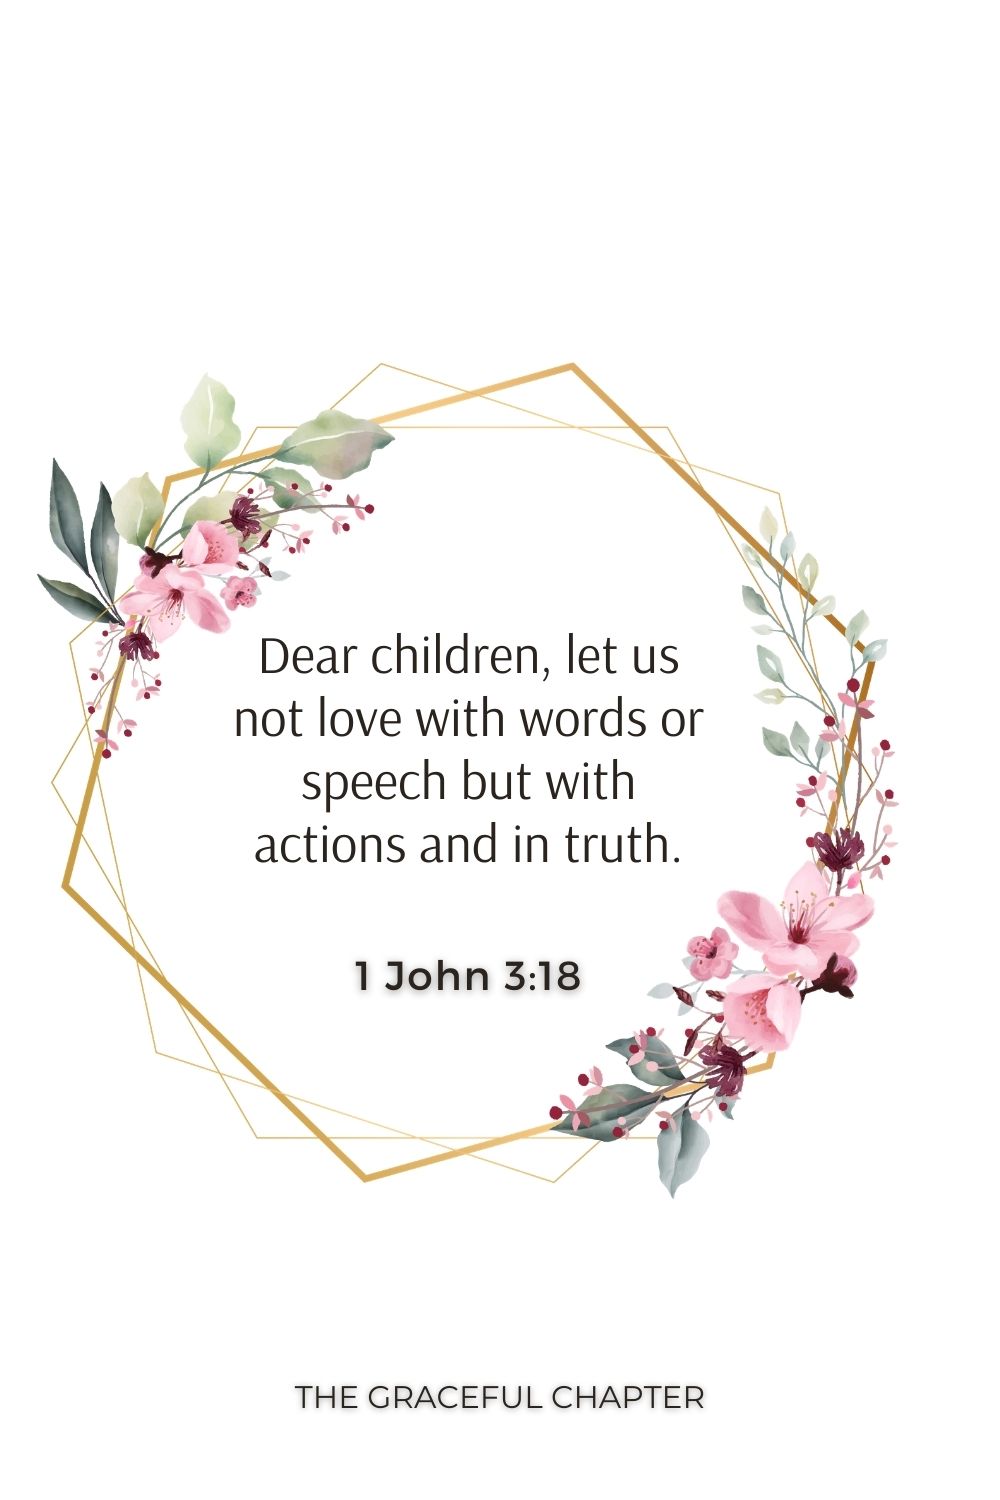 Dear children, let us not love with words or speech but with actions and in truth. 1 John 3:18